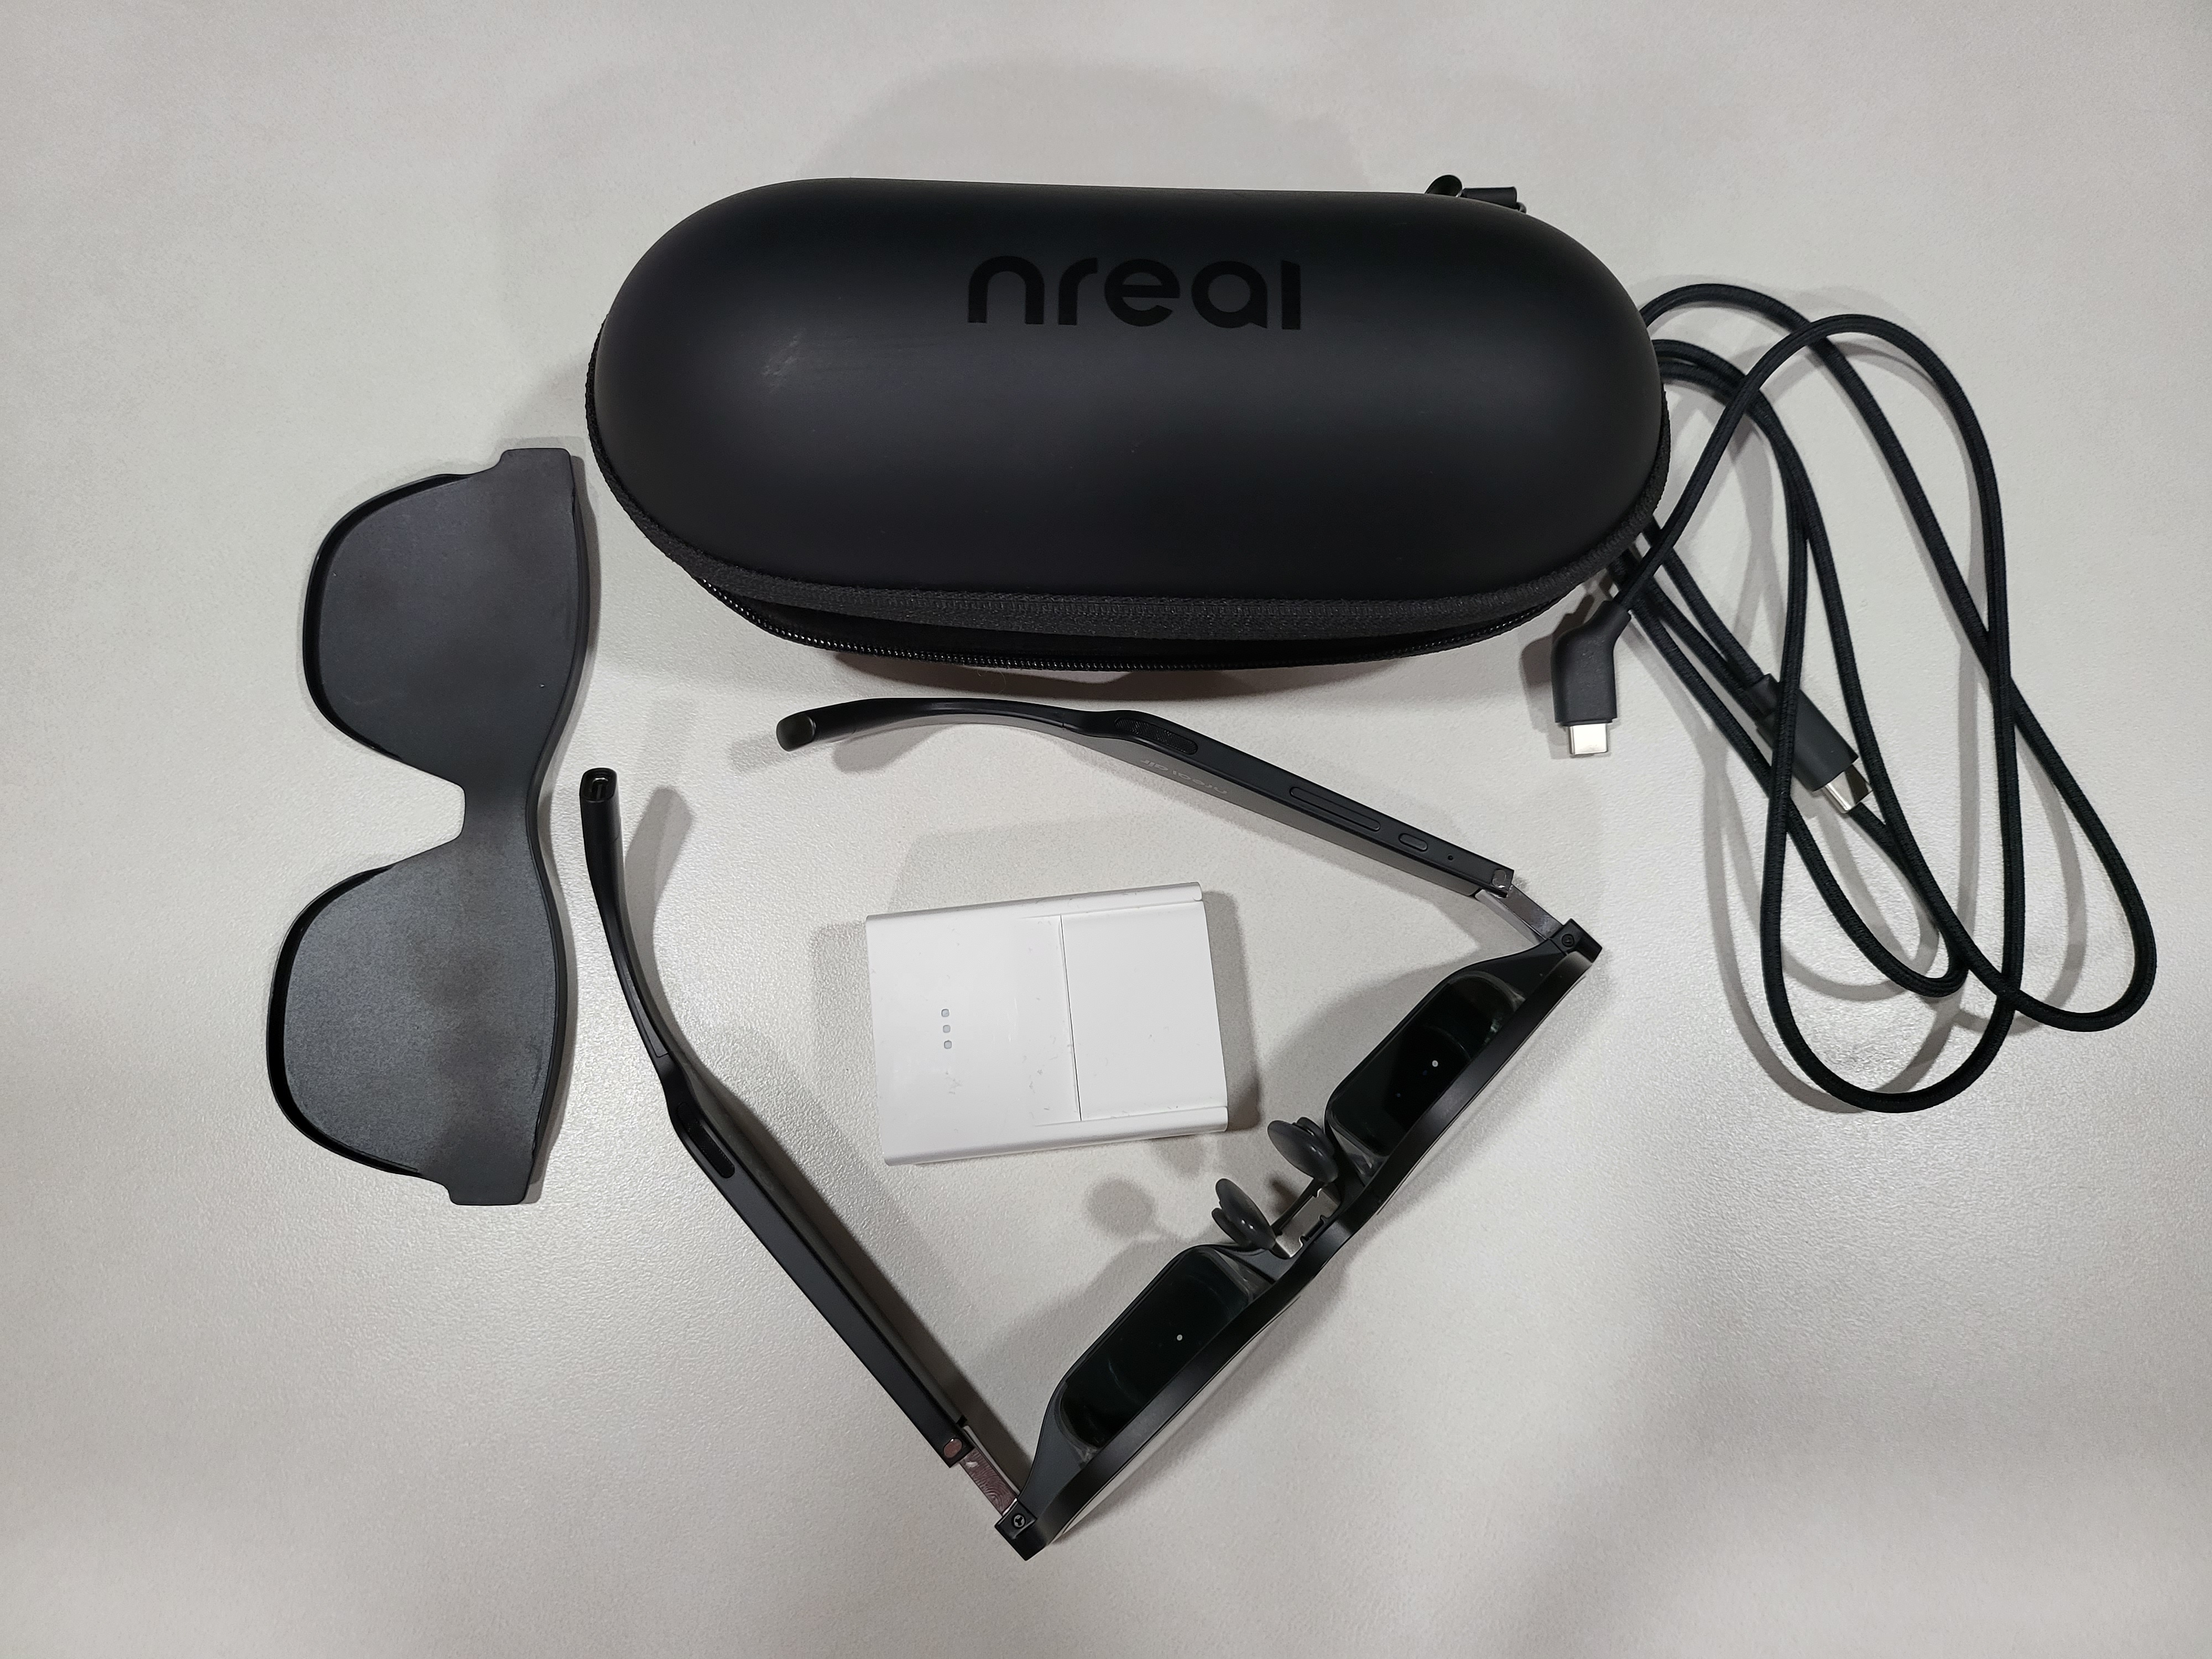 Xreal / Nreal Air with adapter and Lightning adapter 